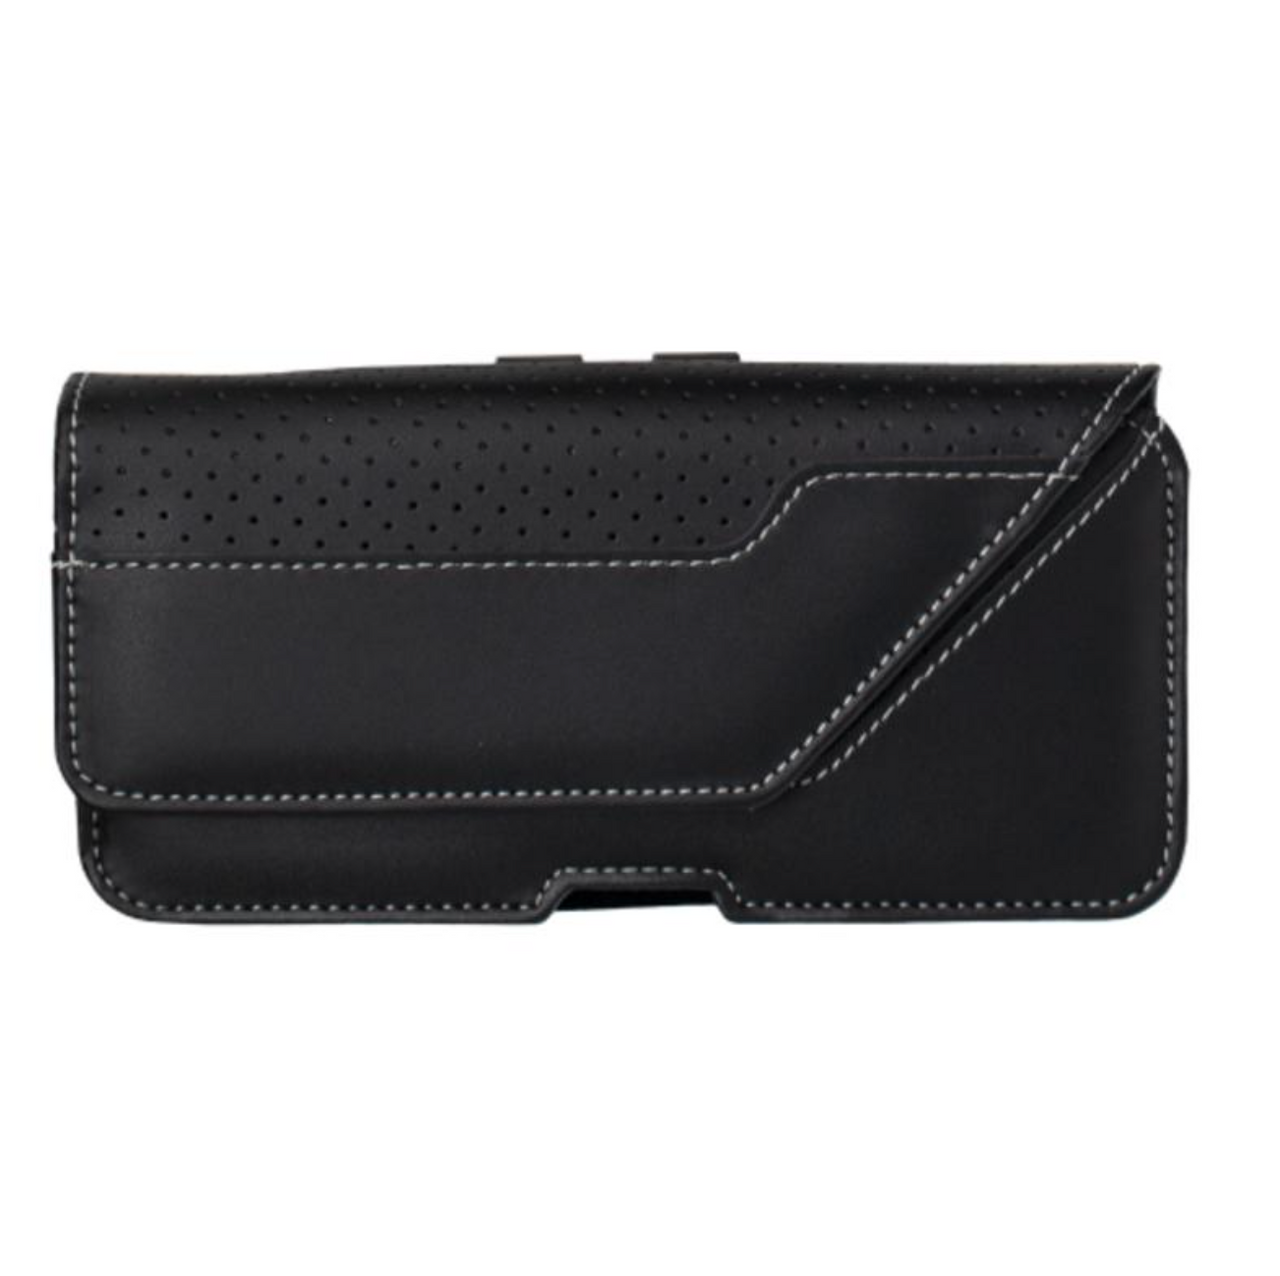 mworks! mCASE! Universal Rugged Leather Pouch D1